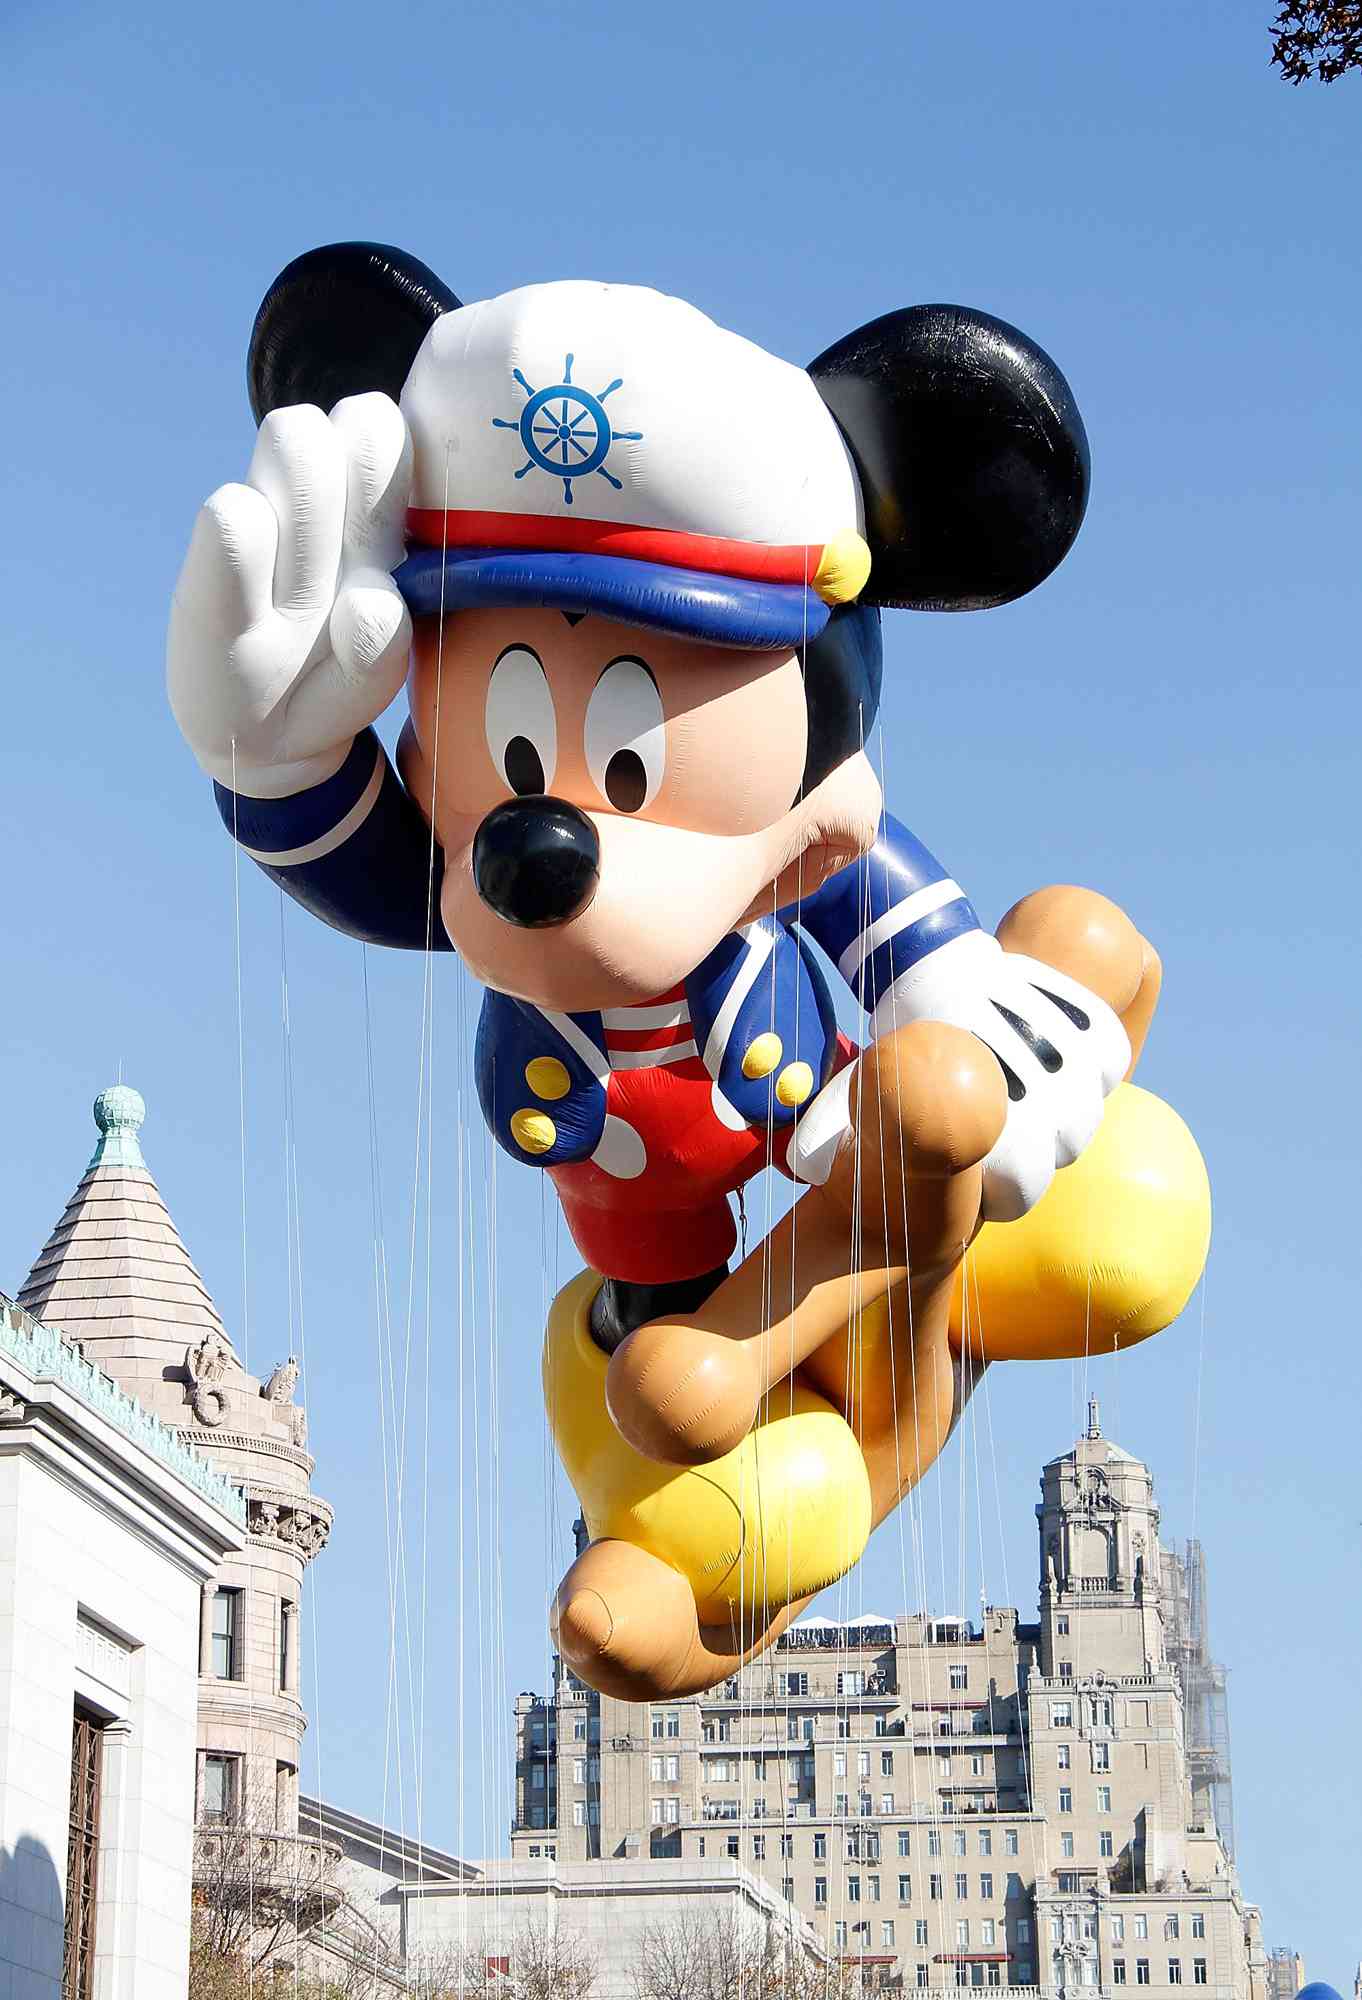 3. Mickey Mouse&nbsp;